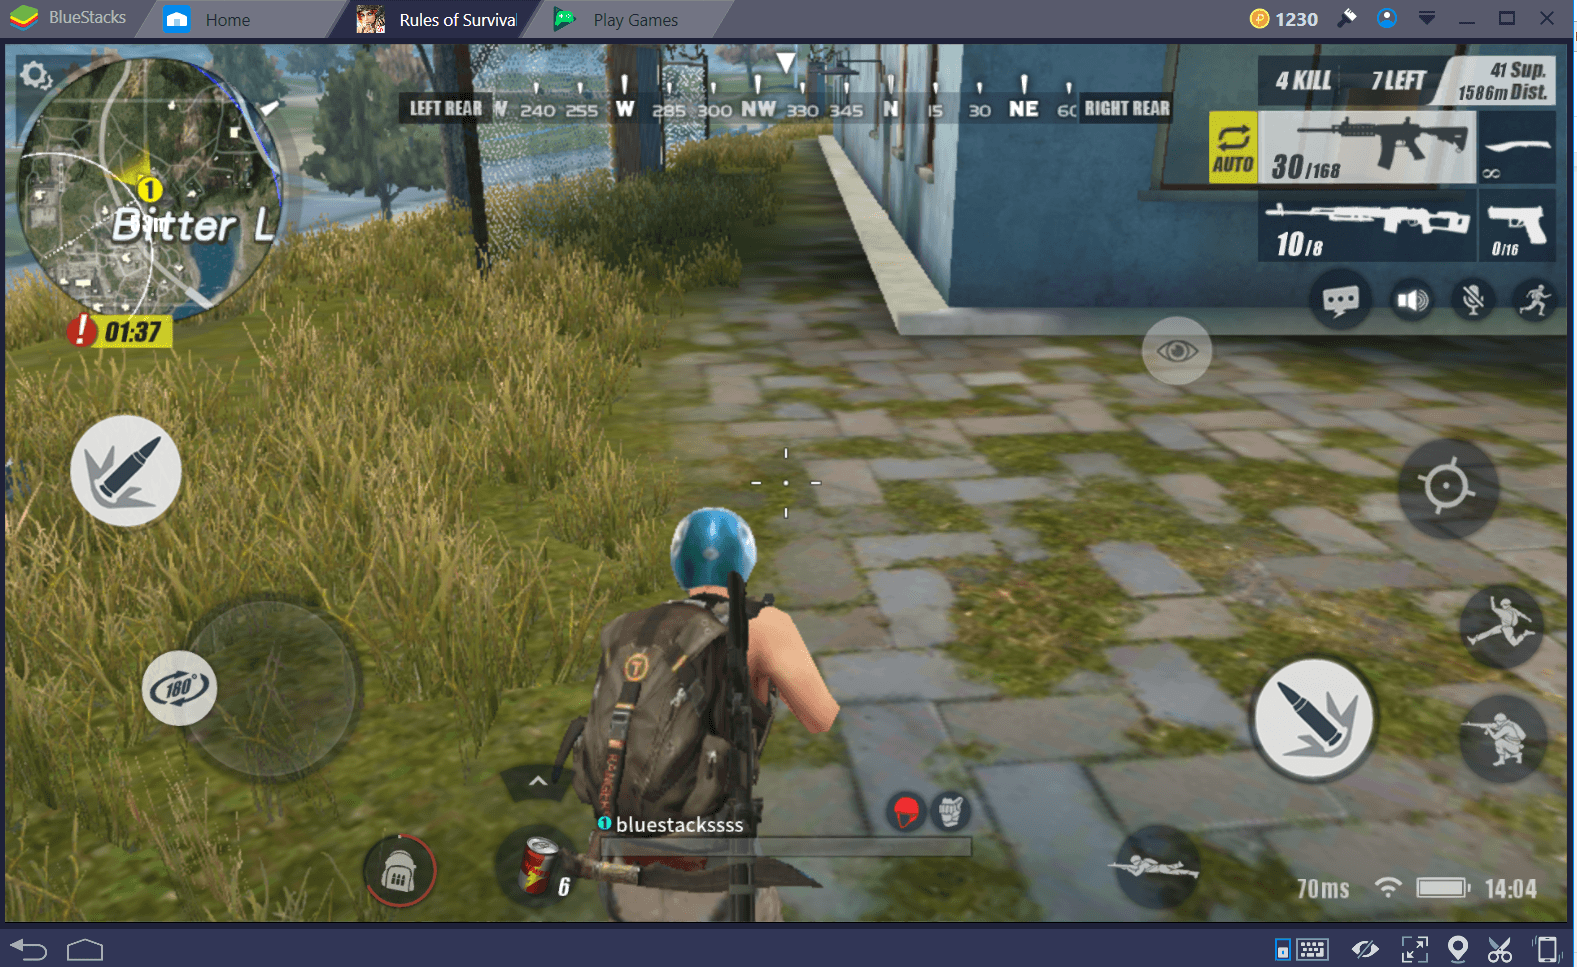 Top Tips For Improving Your Aim When Playing Rules Of Survival